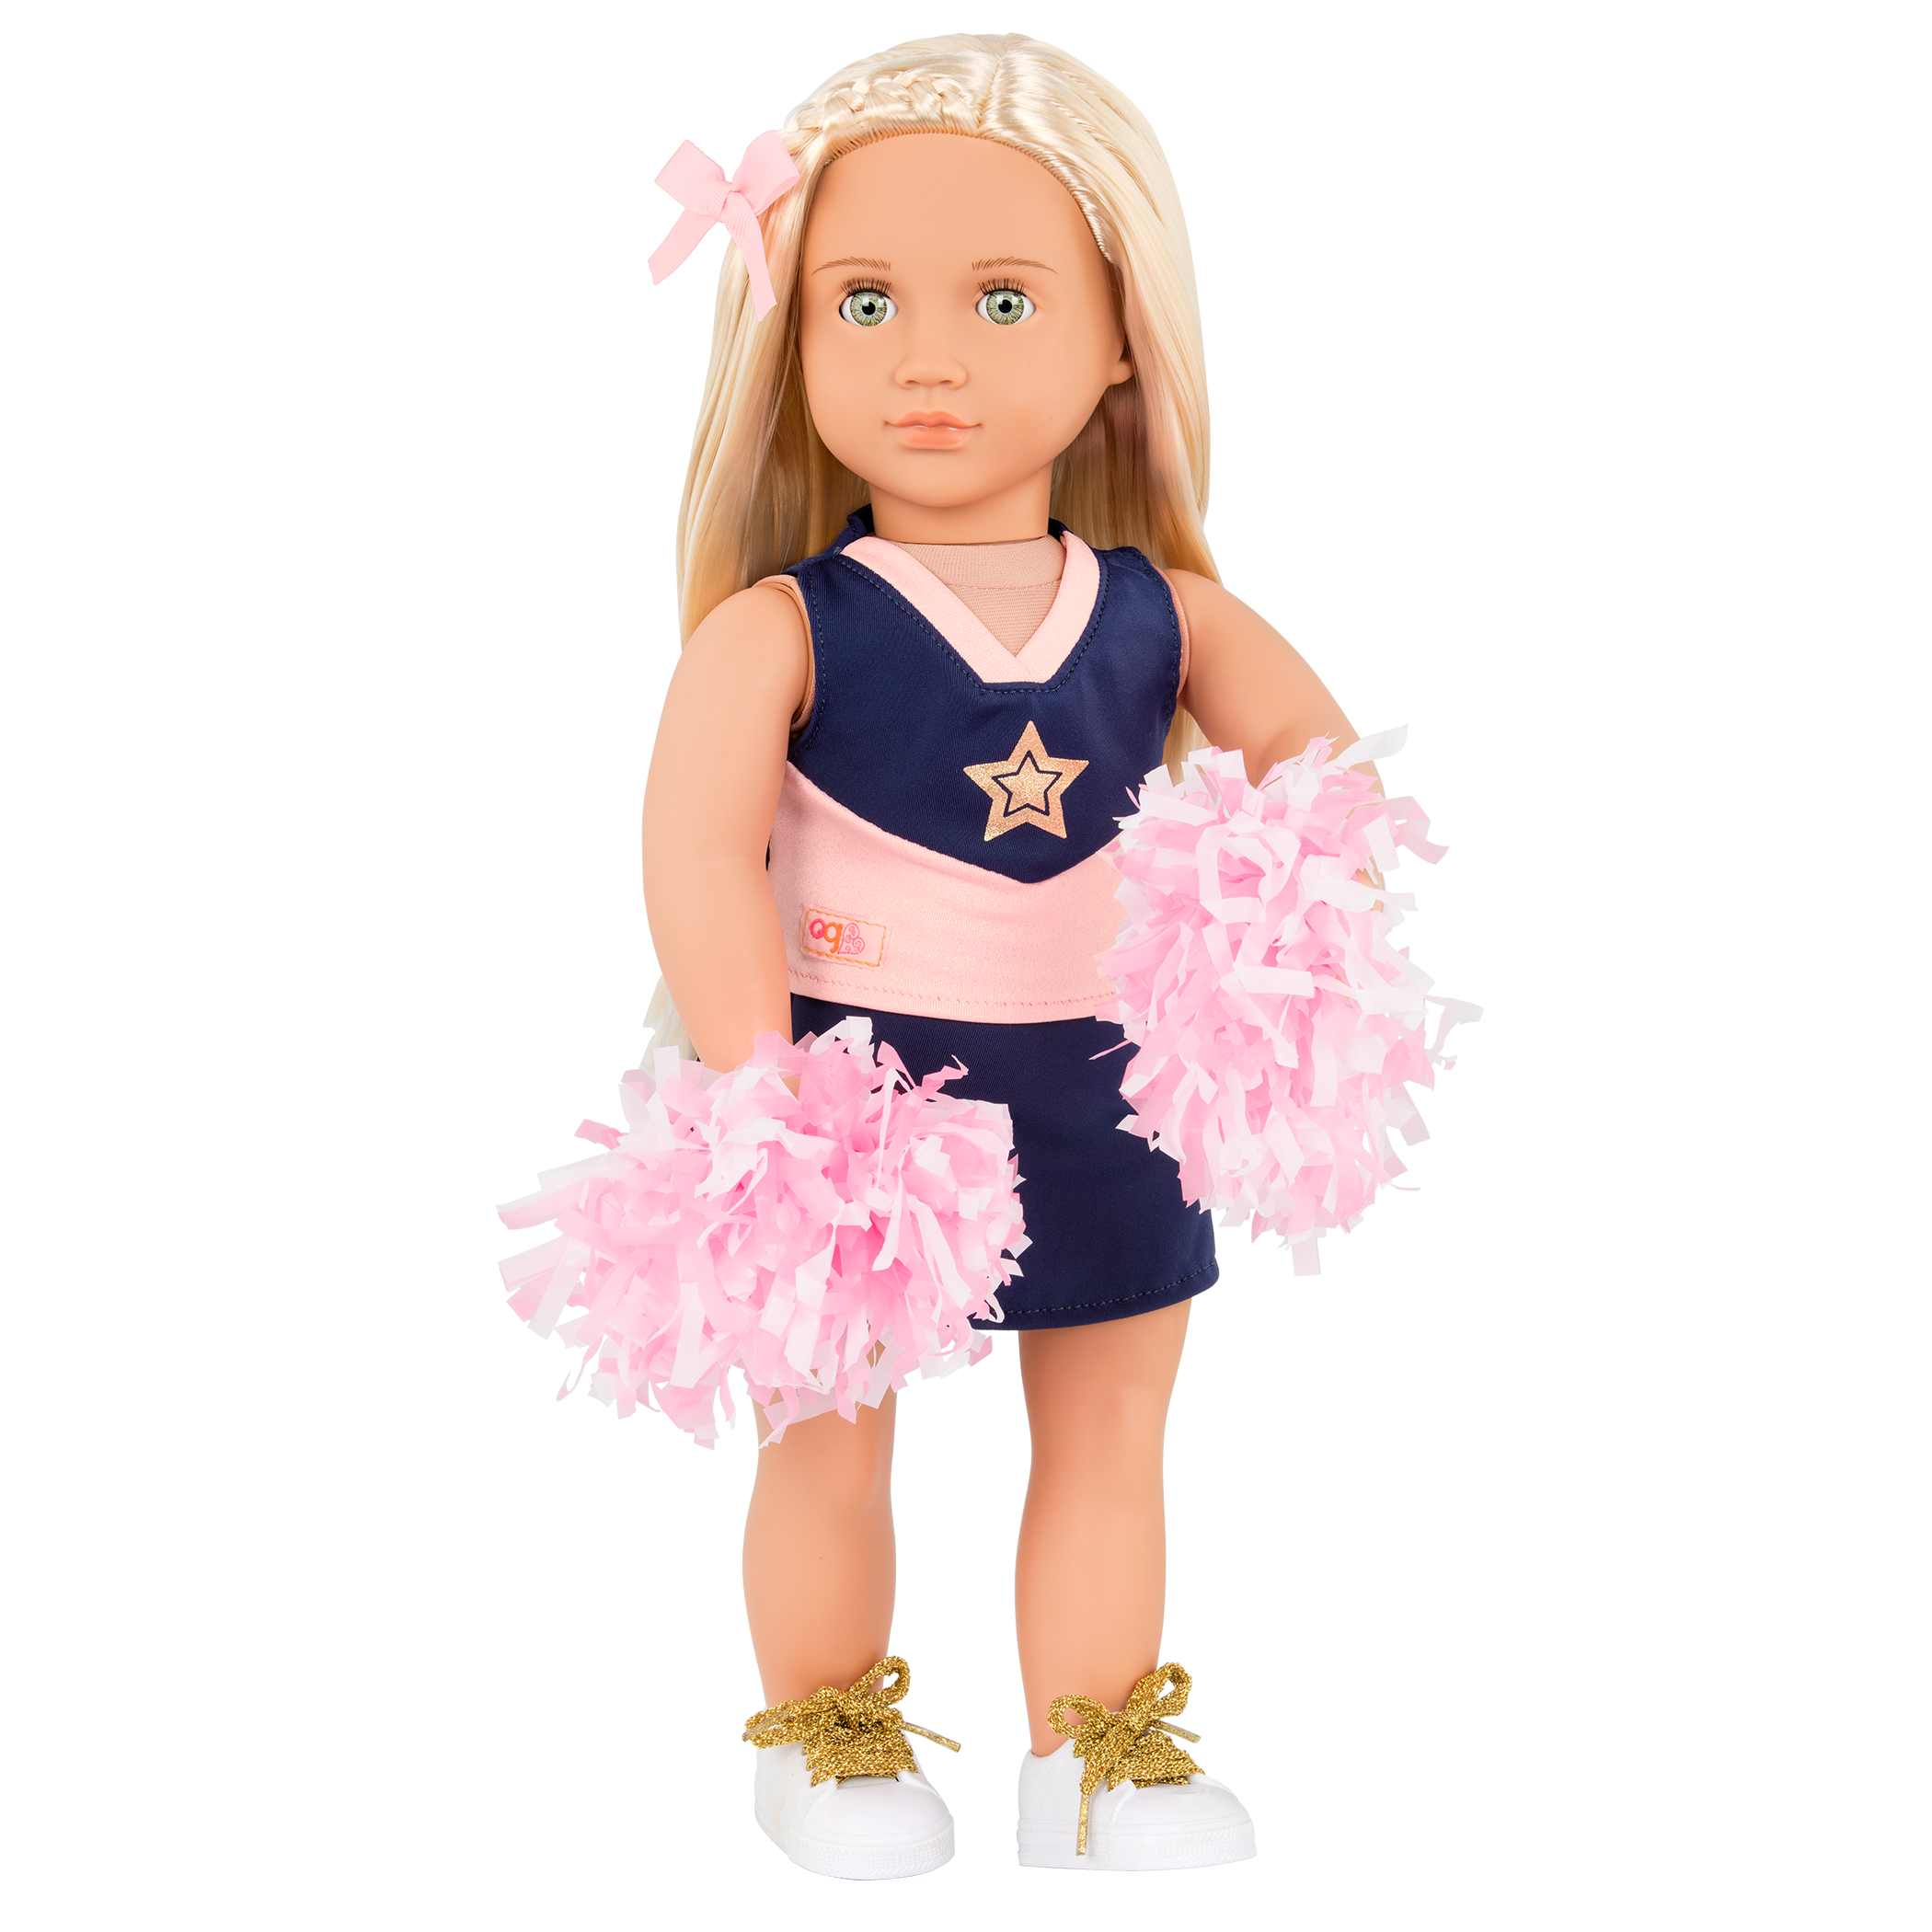 https://ourgeneration.com/wp-content/uploads/BD31258_Khloe-cheerleader-doll-MAIN.png